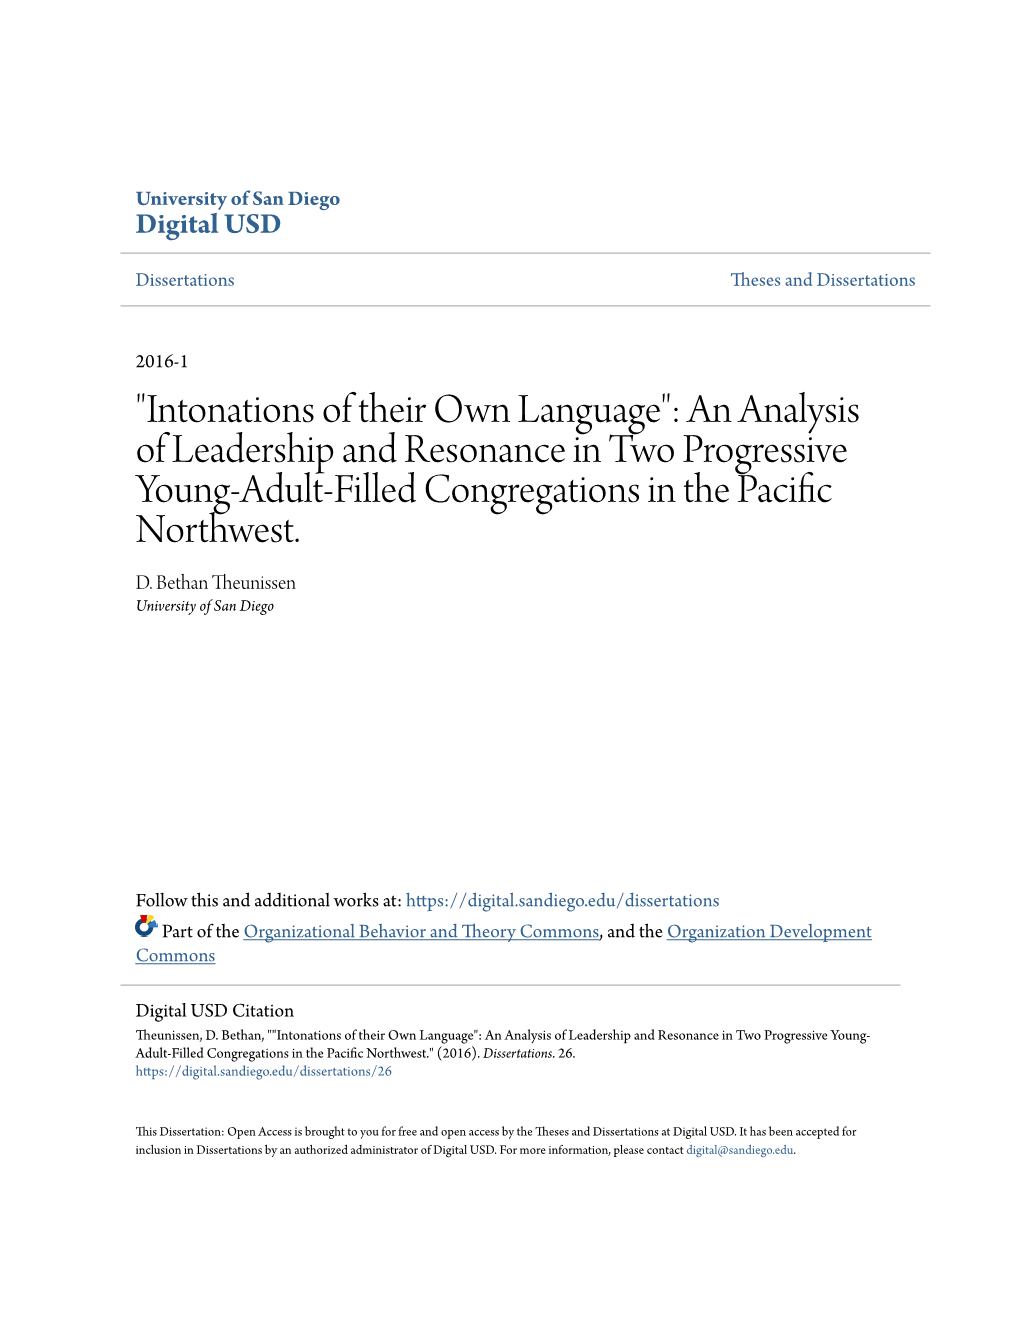 An Analysis of Leadership and Resonance in Two Progressive Young-Adult-Filled Congregations in the Pacific Northwest